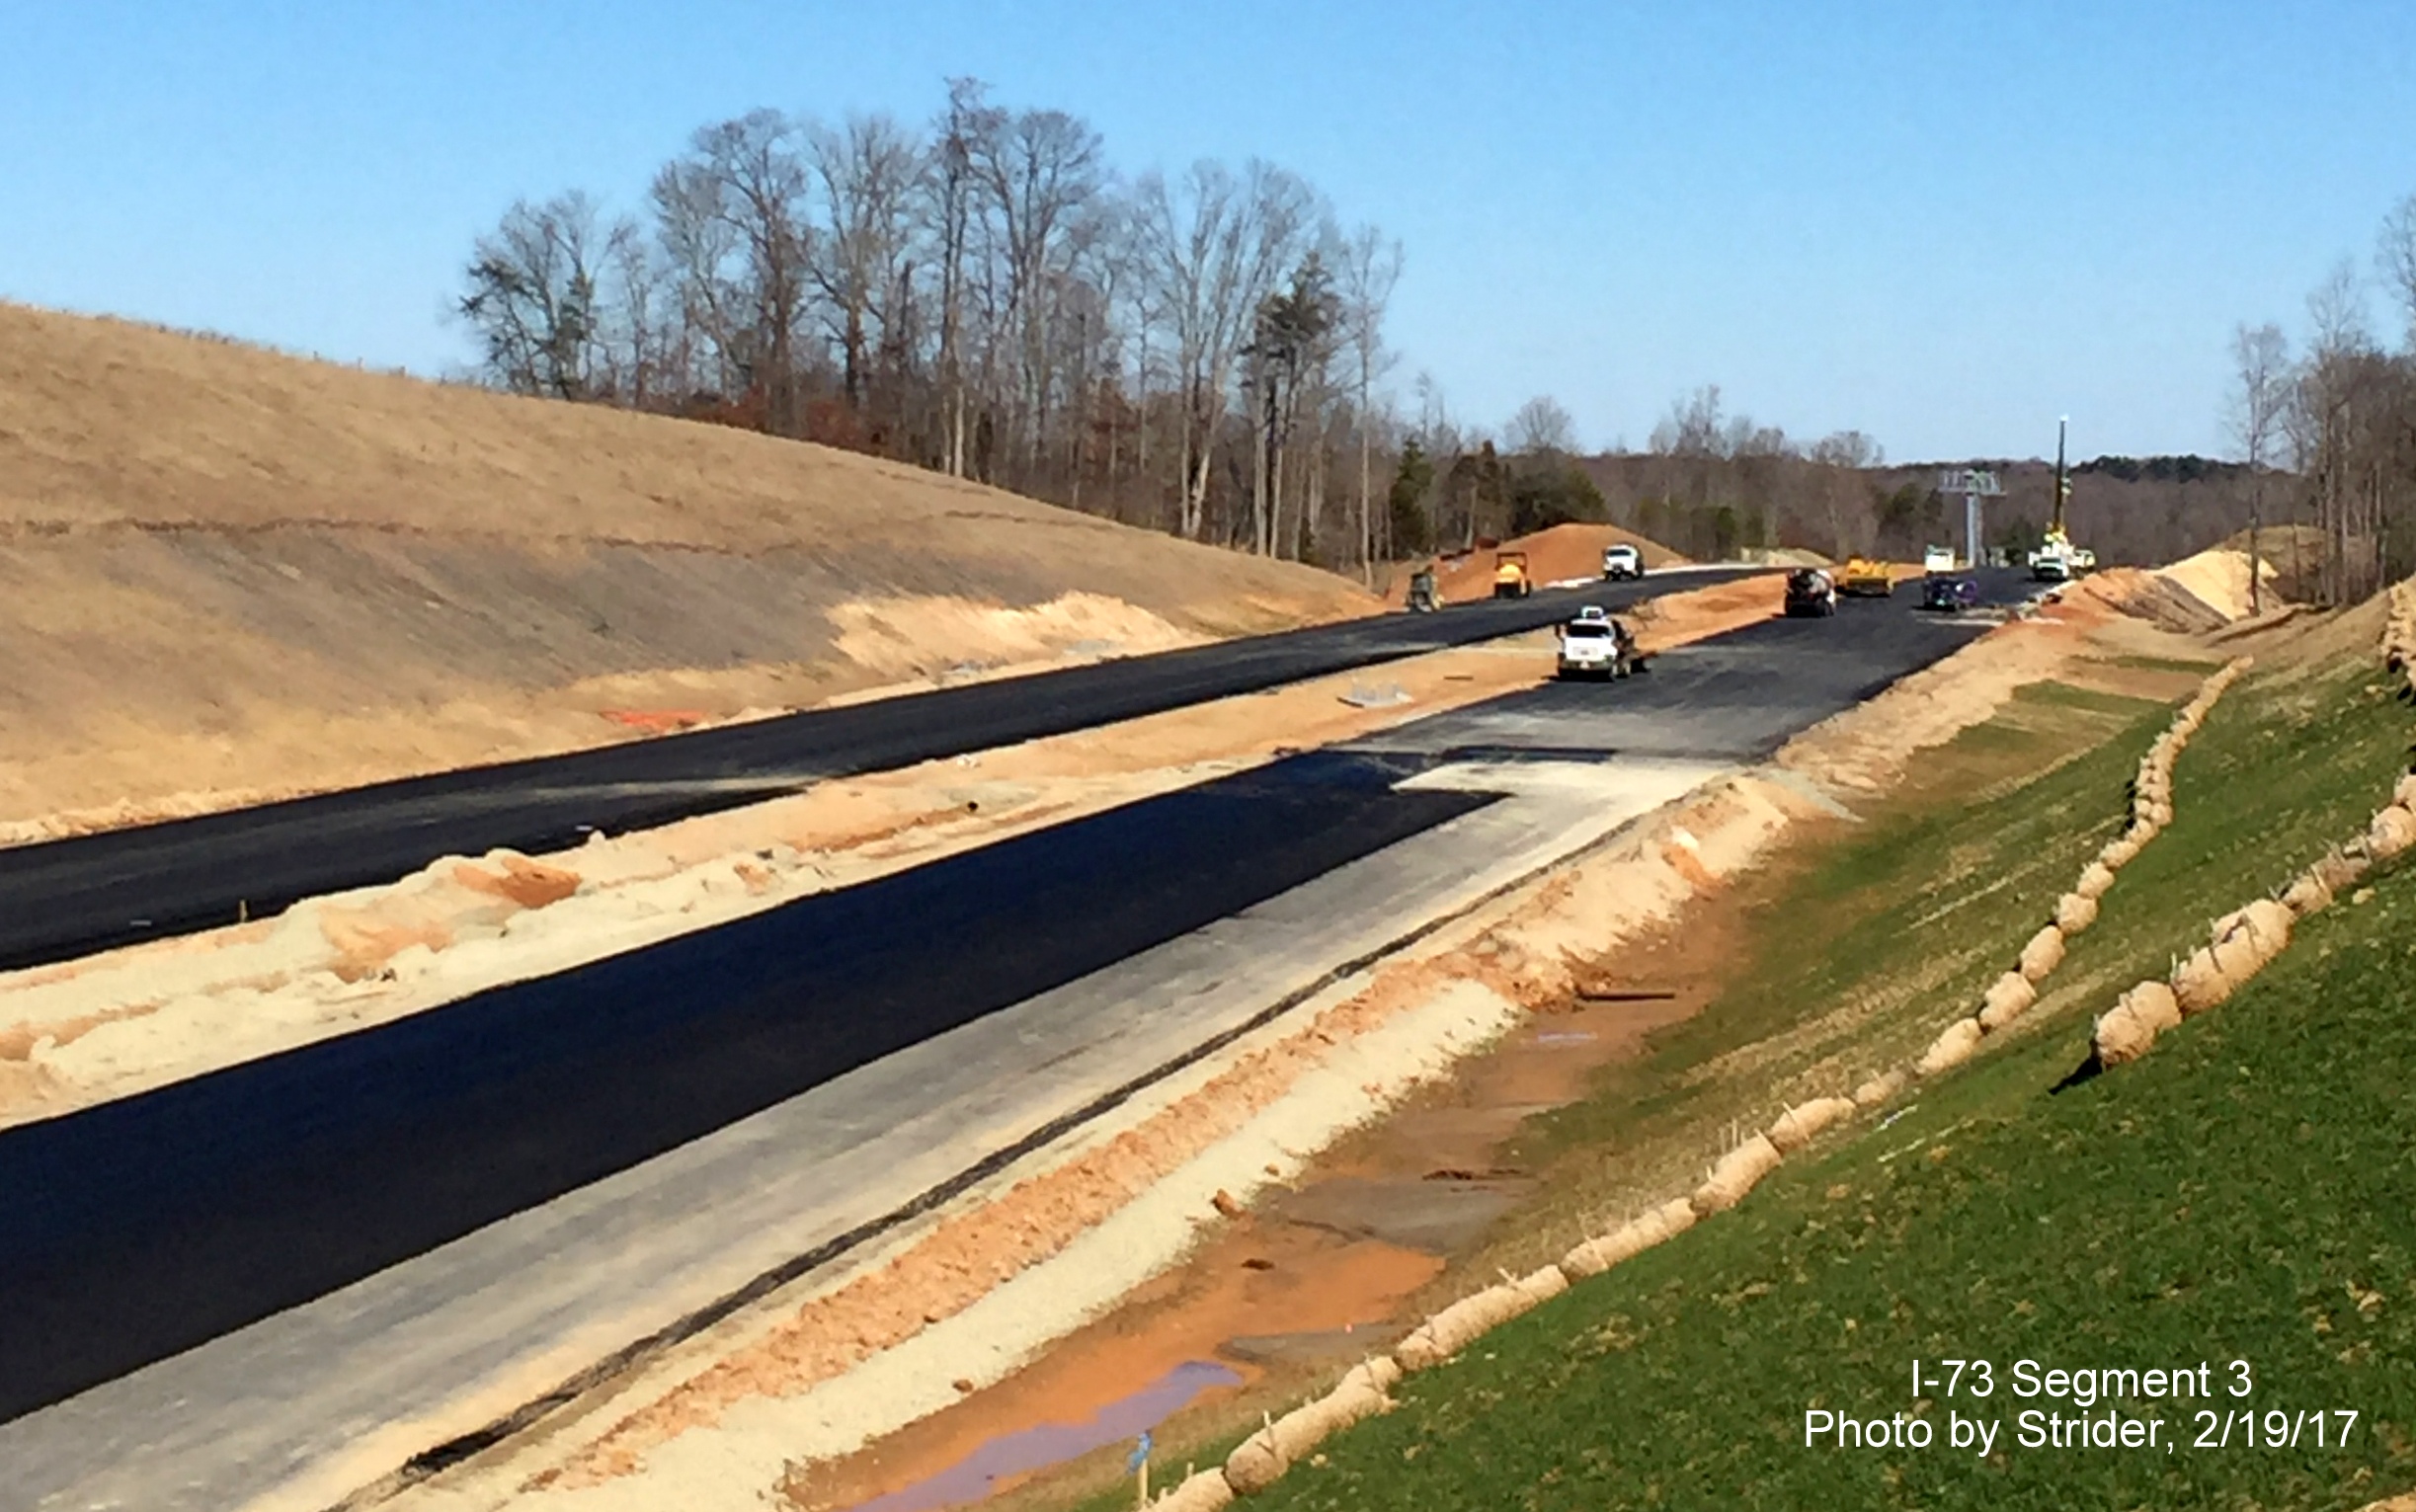 Image of view looking north from Bunch Rd bridge showing progress paving future I-73 lanes, from Strider